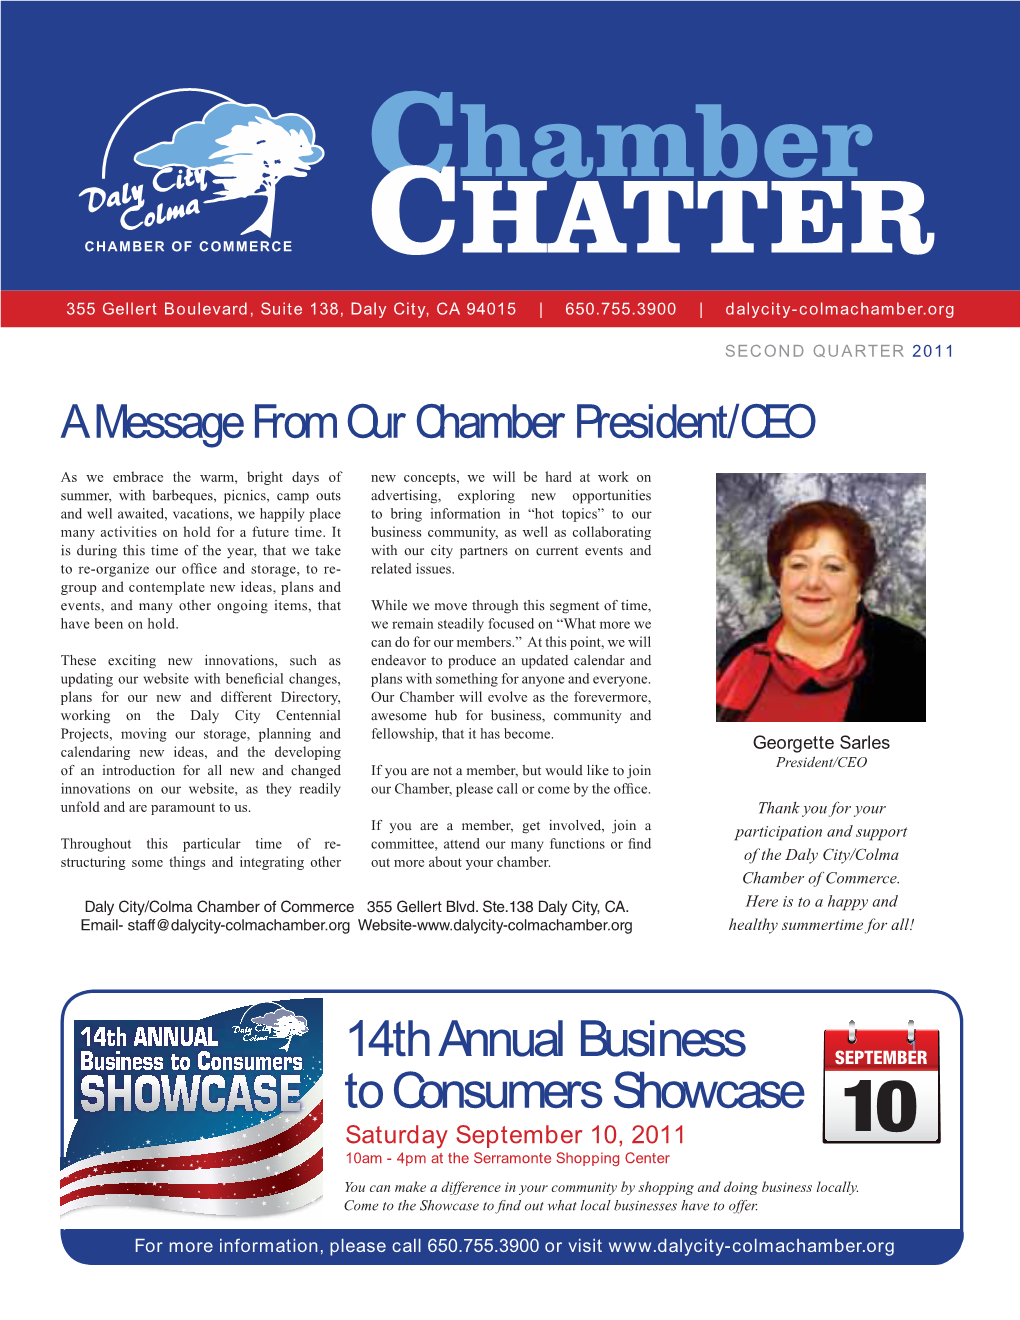 14Th Annual Business to Consumers Showcase